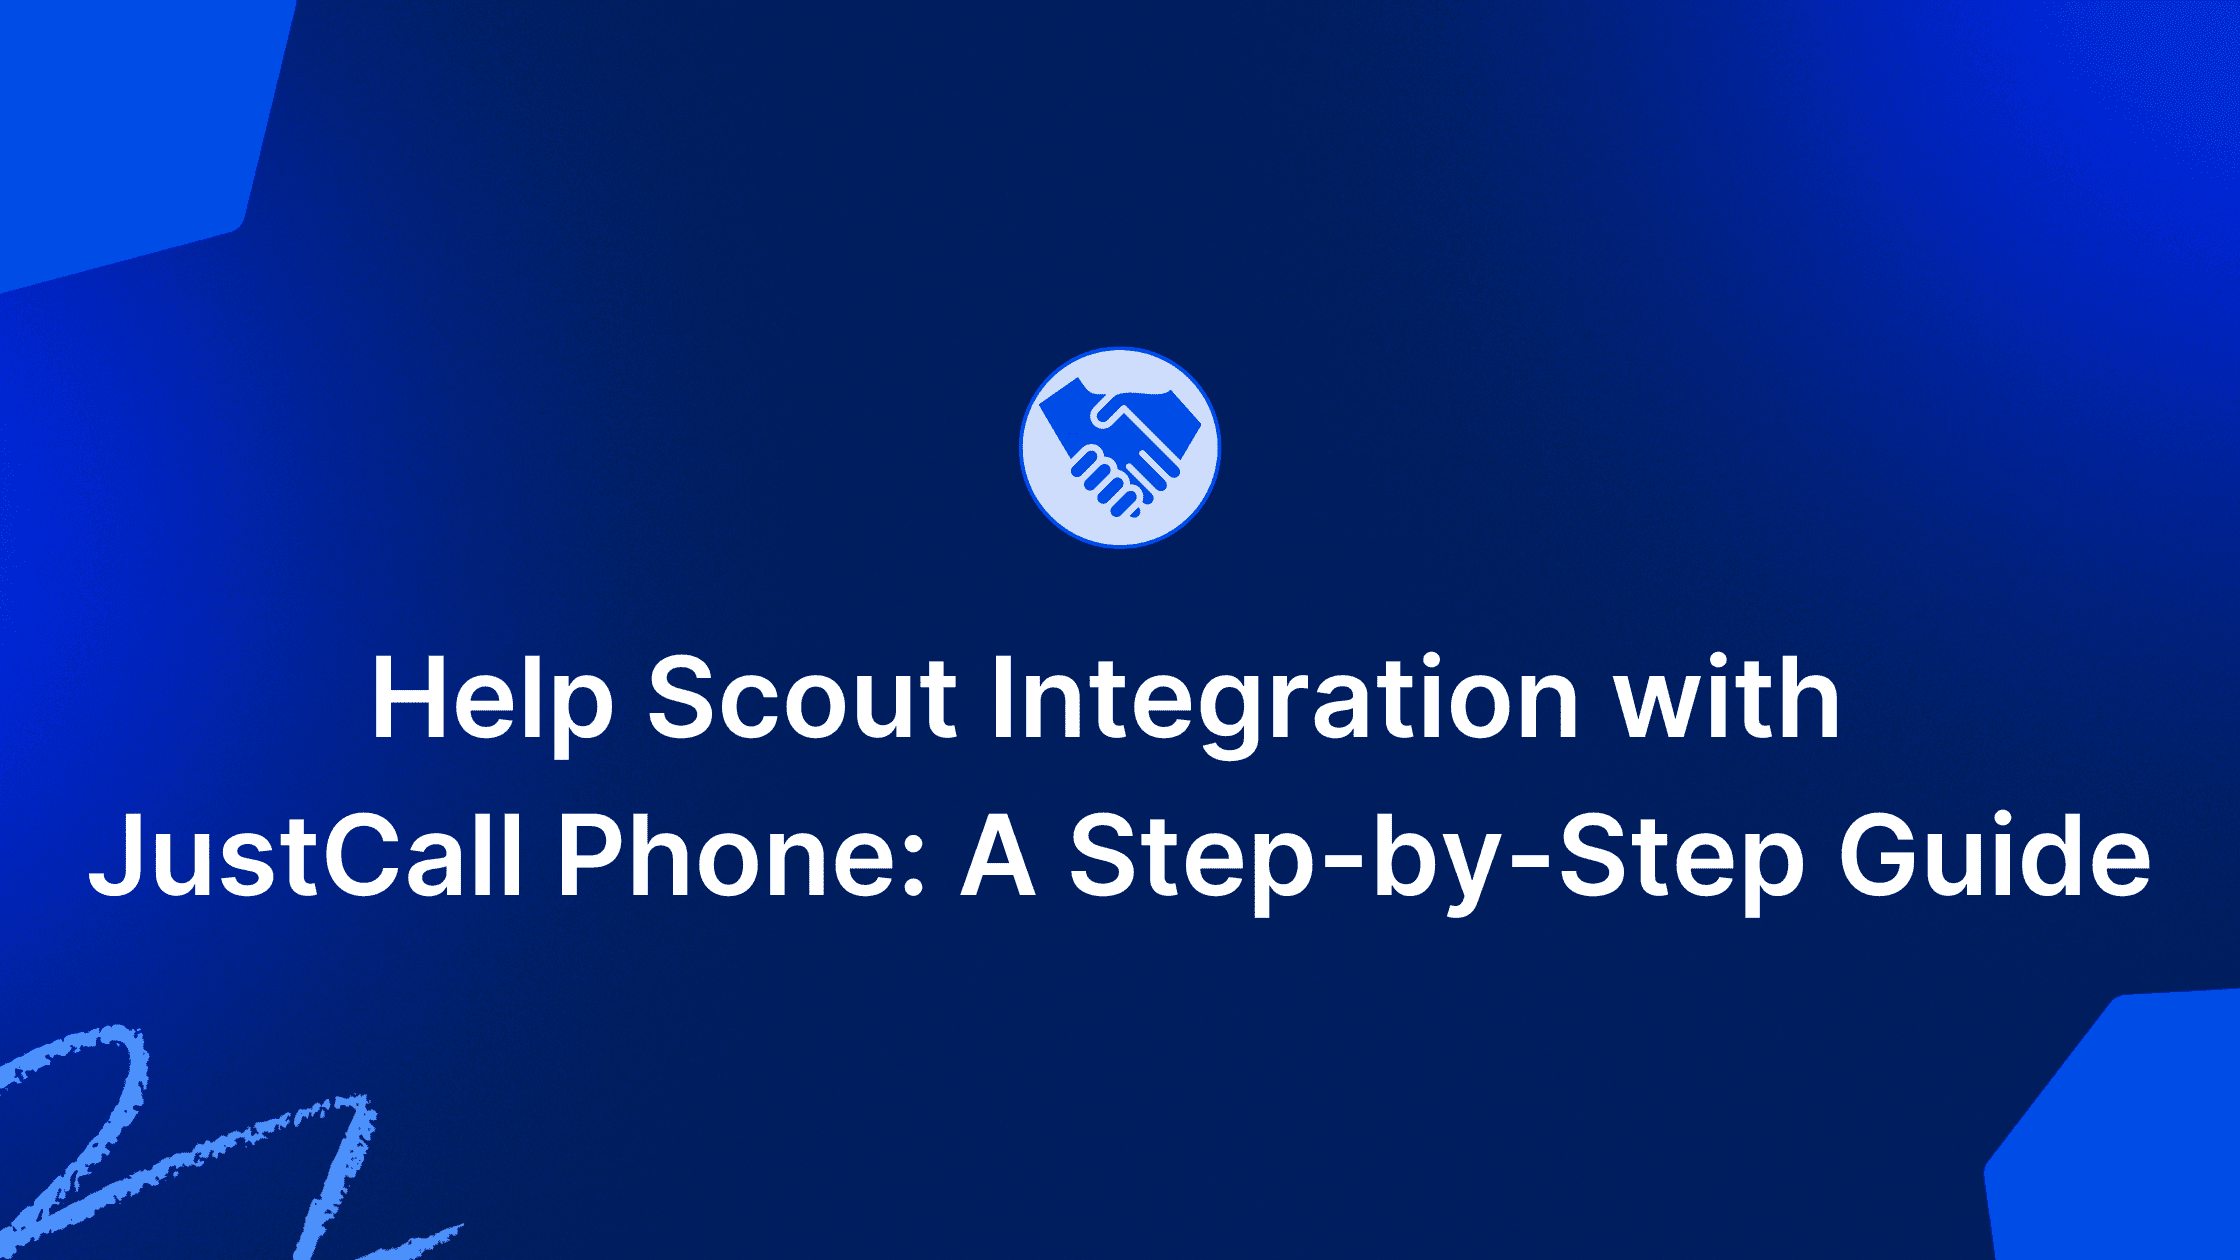 Help Scout JustCall Phone Integrations